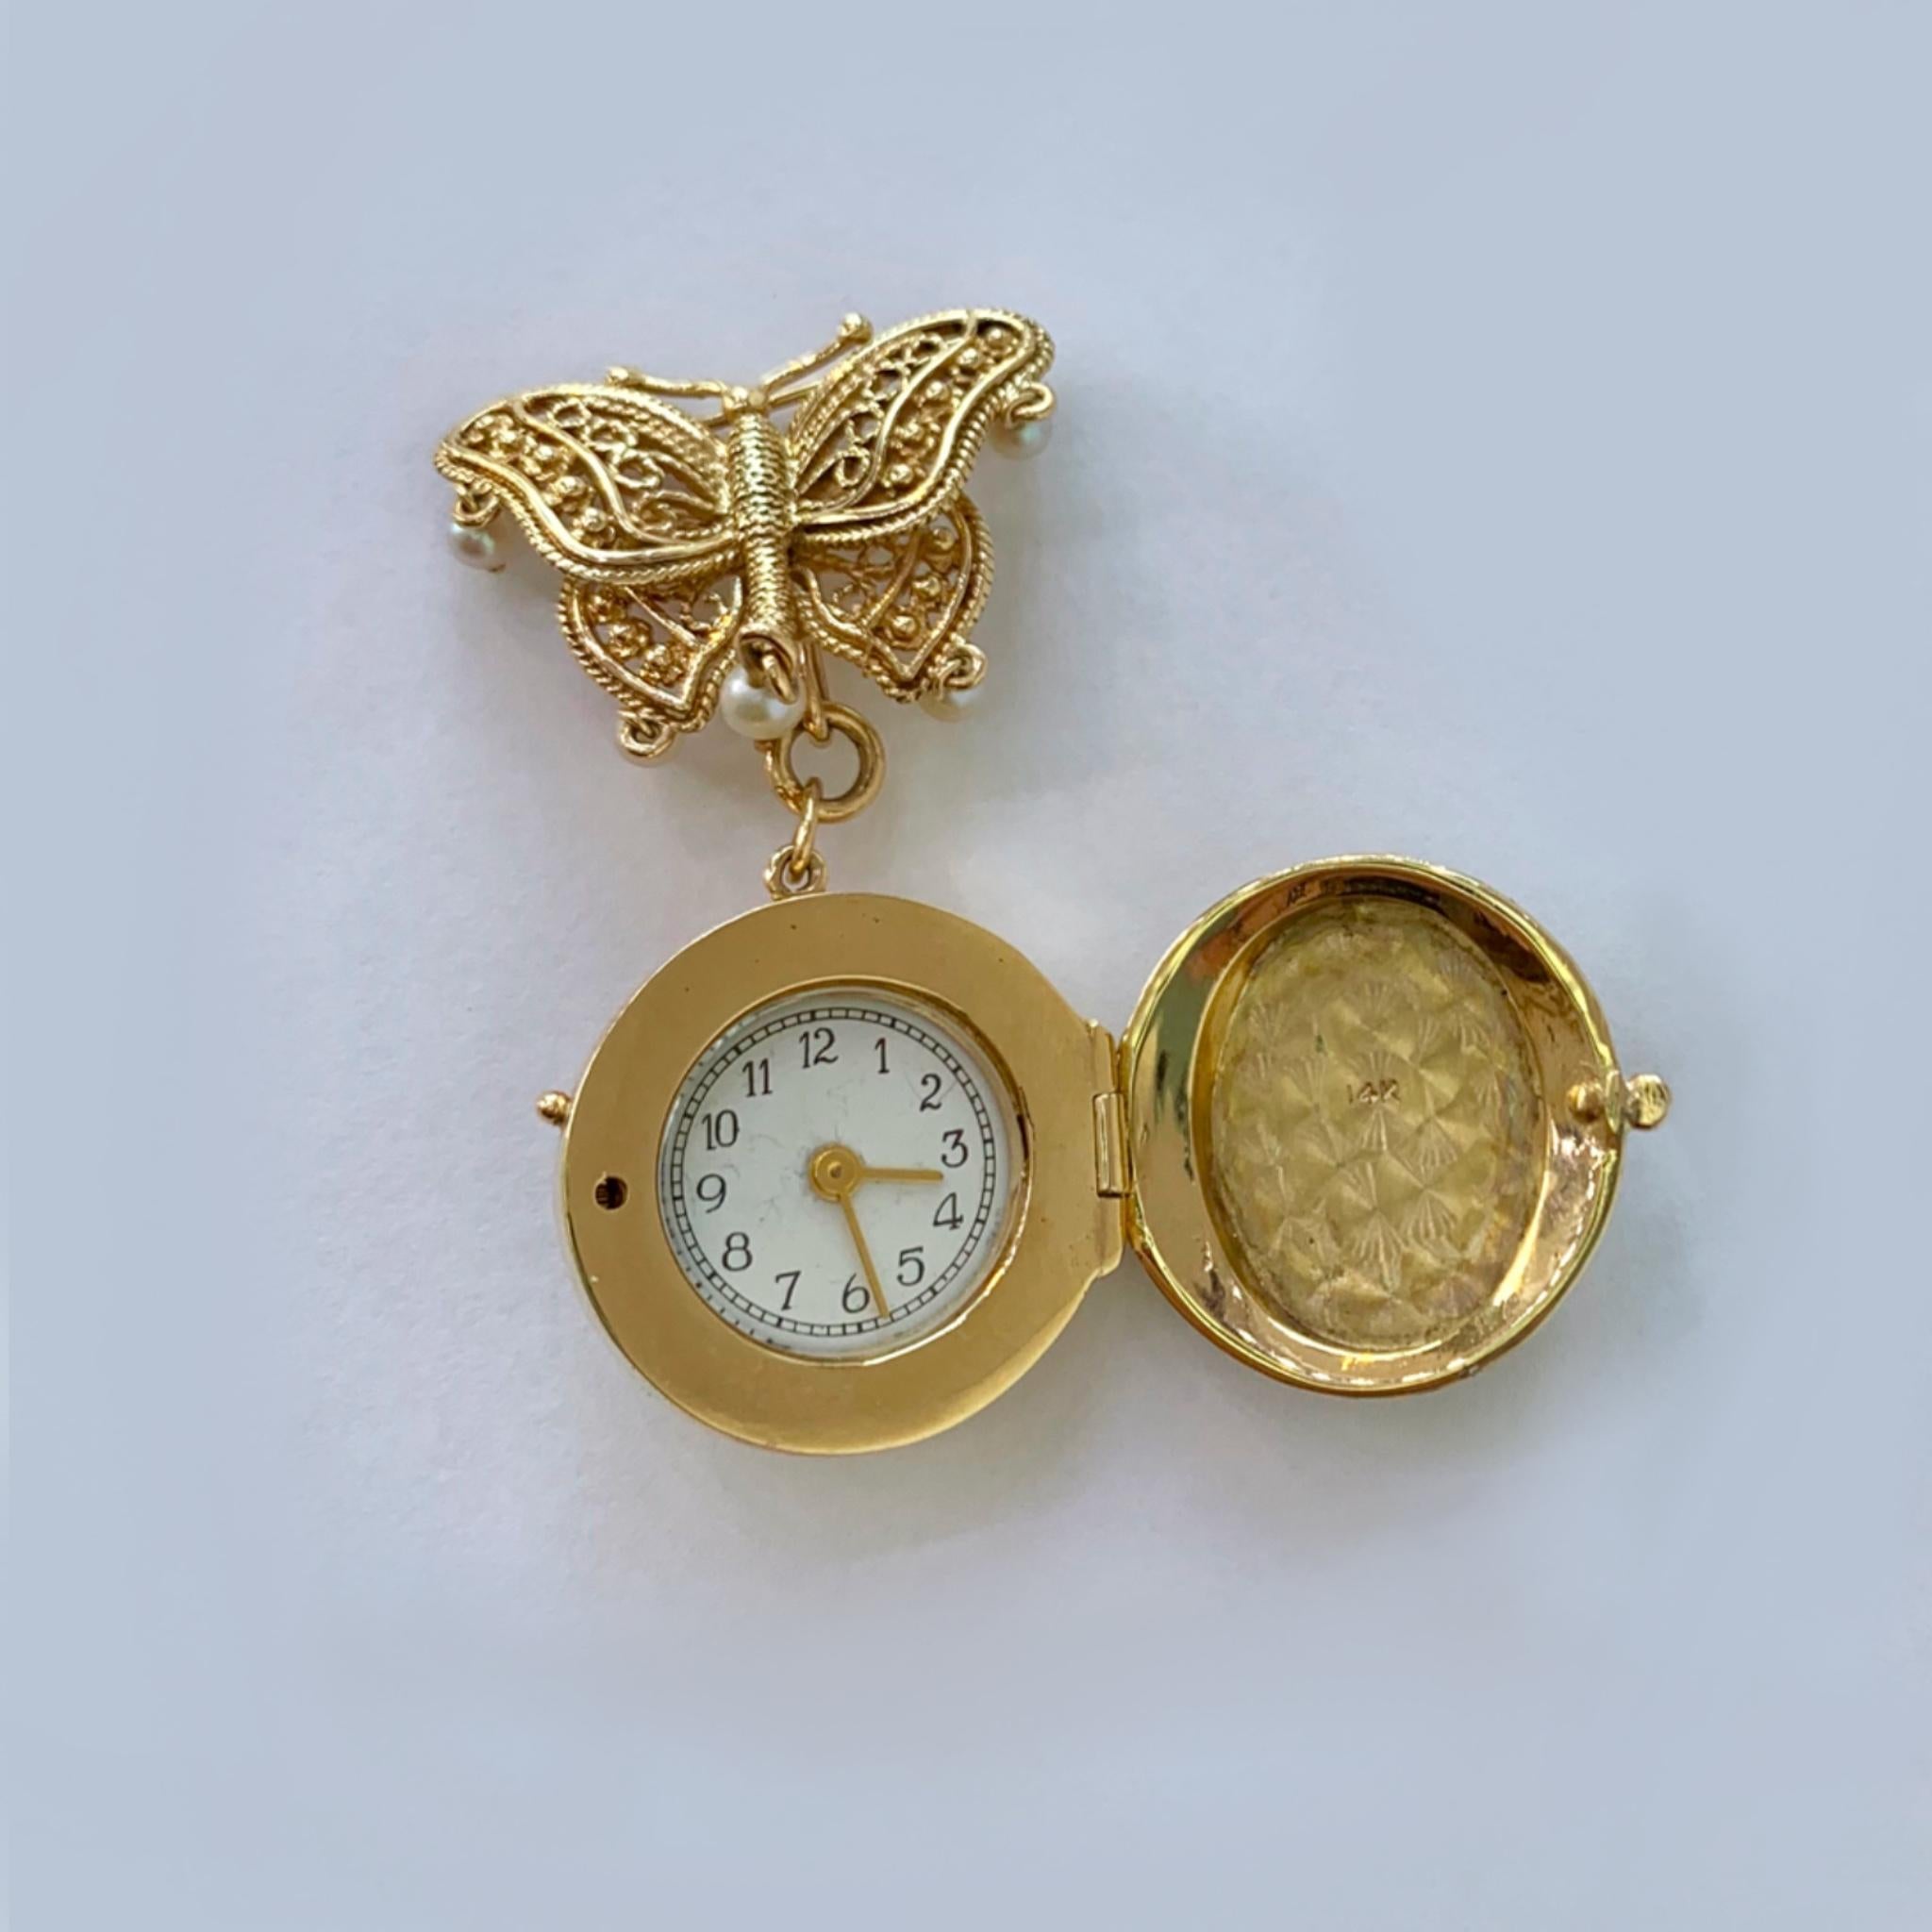 this brooch contains a miniature picture